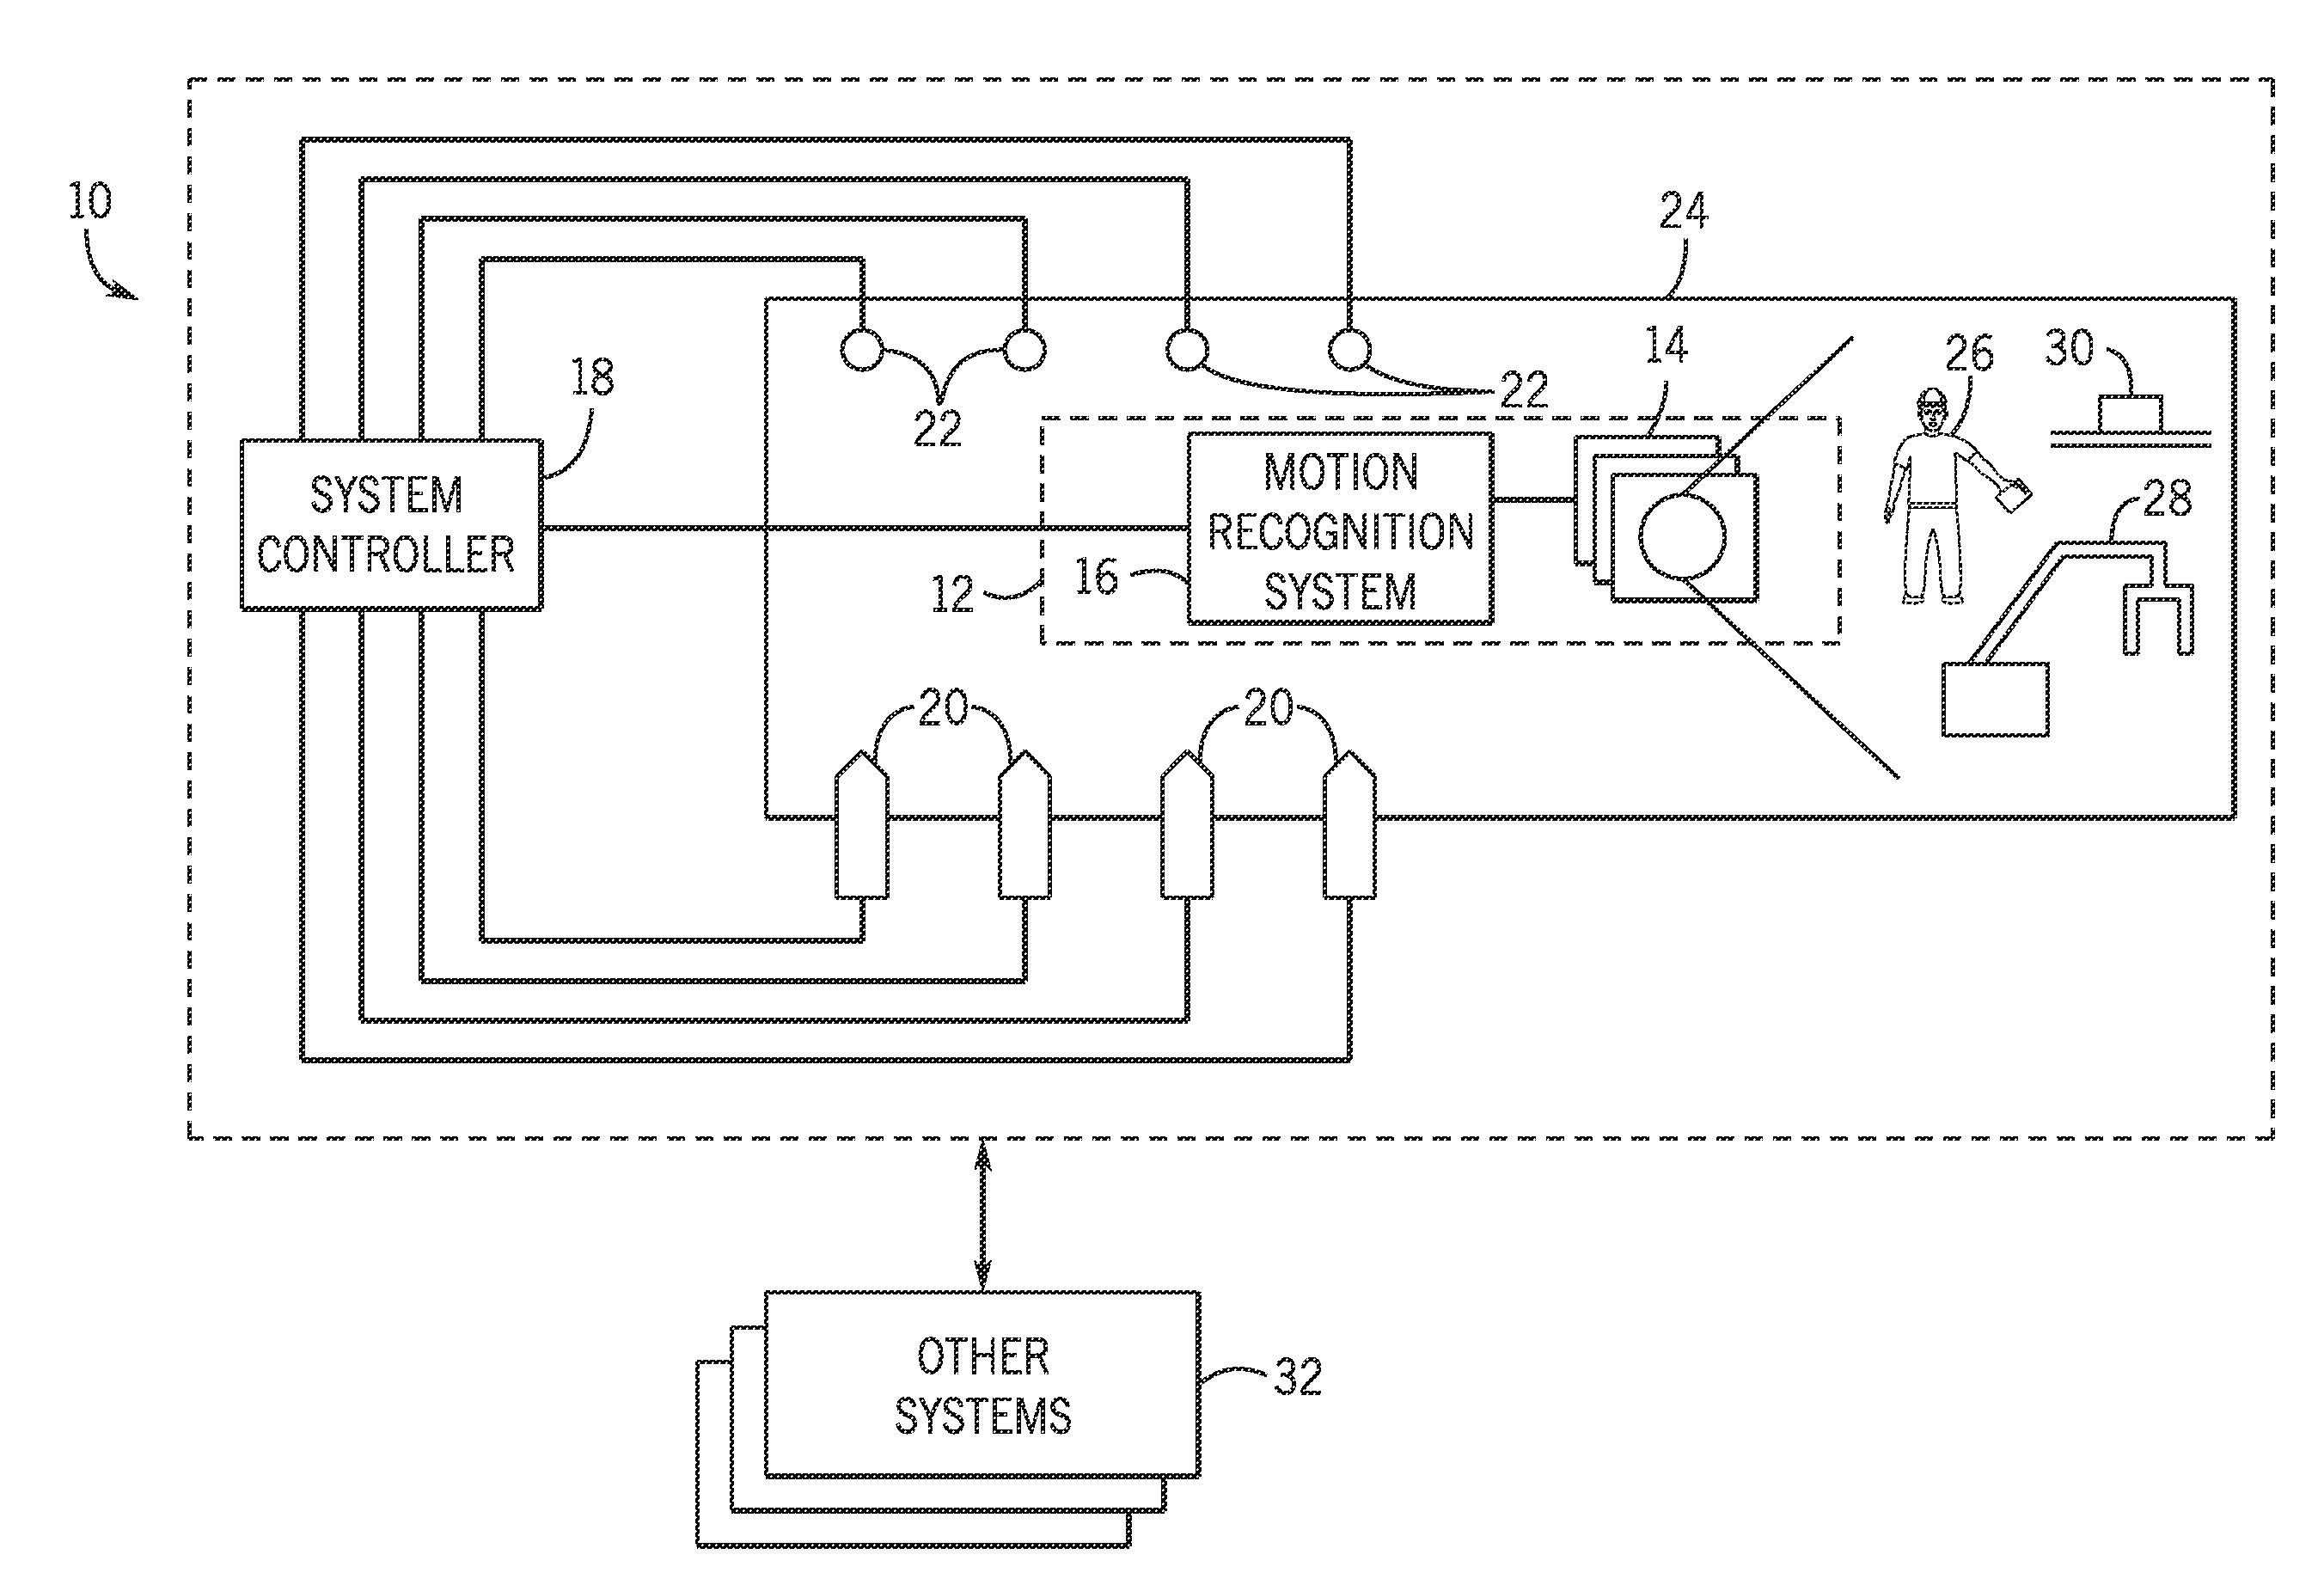 Recognition-based industrial automation control with position and derivative decision reference